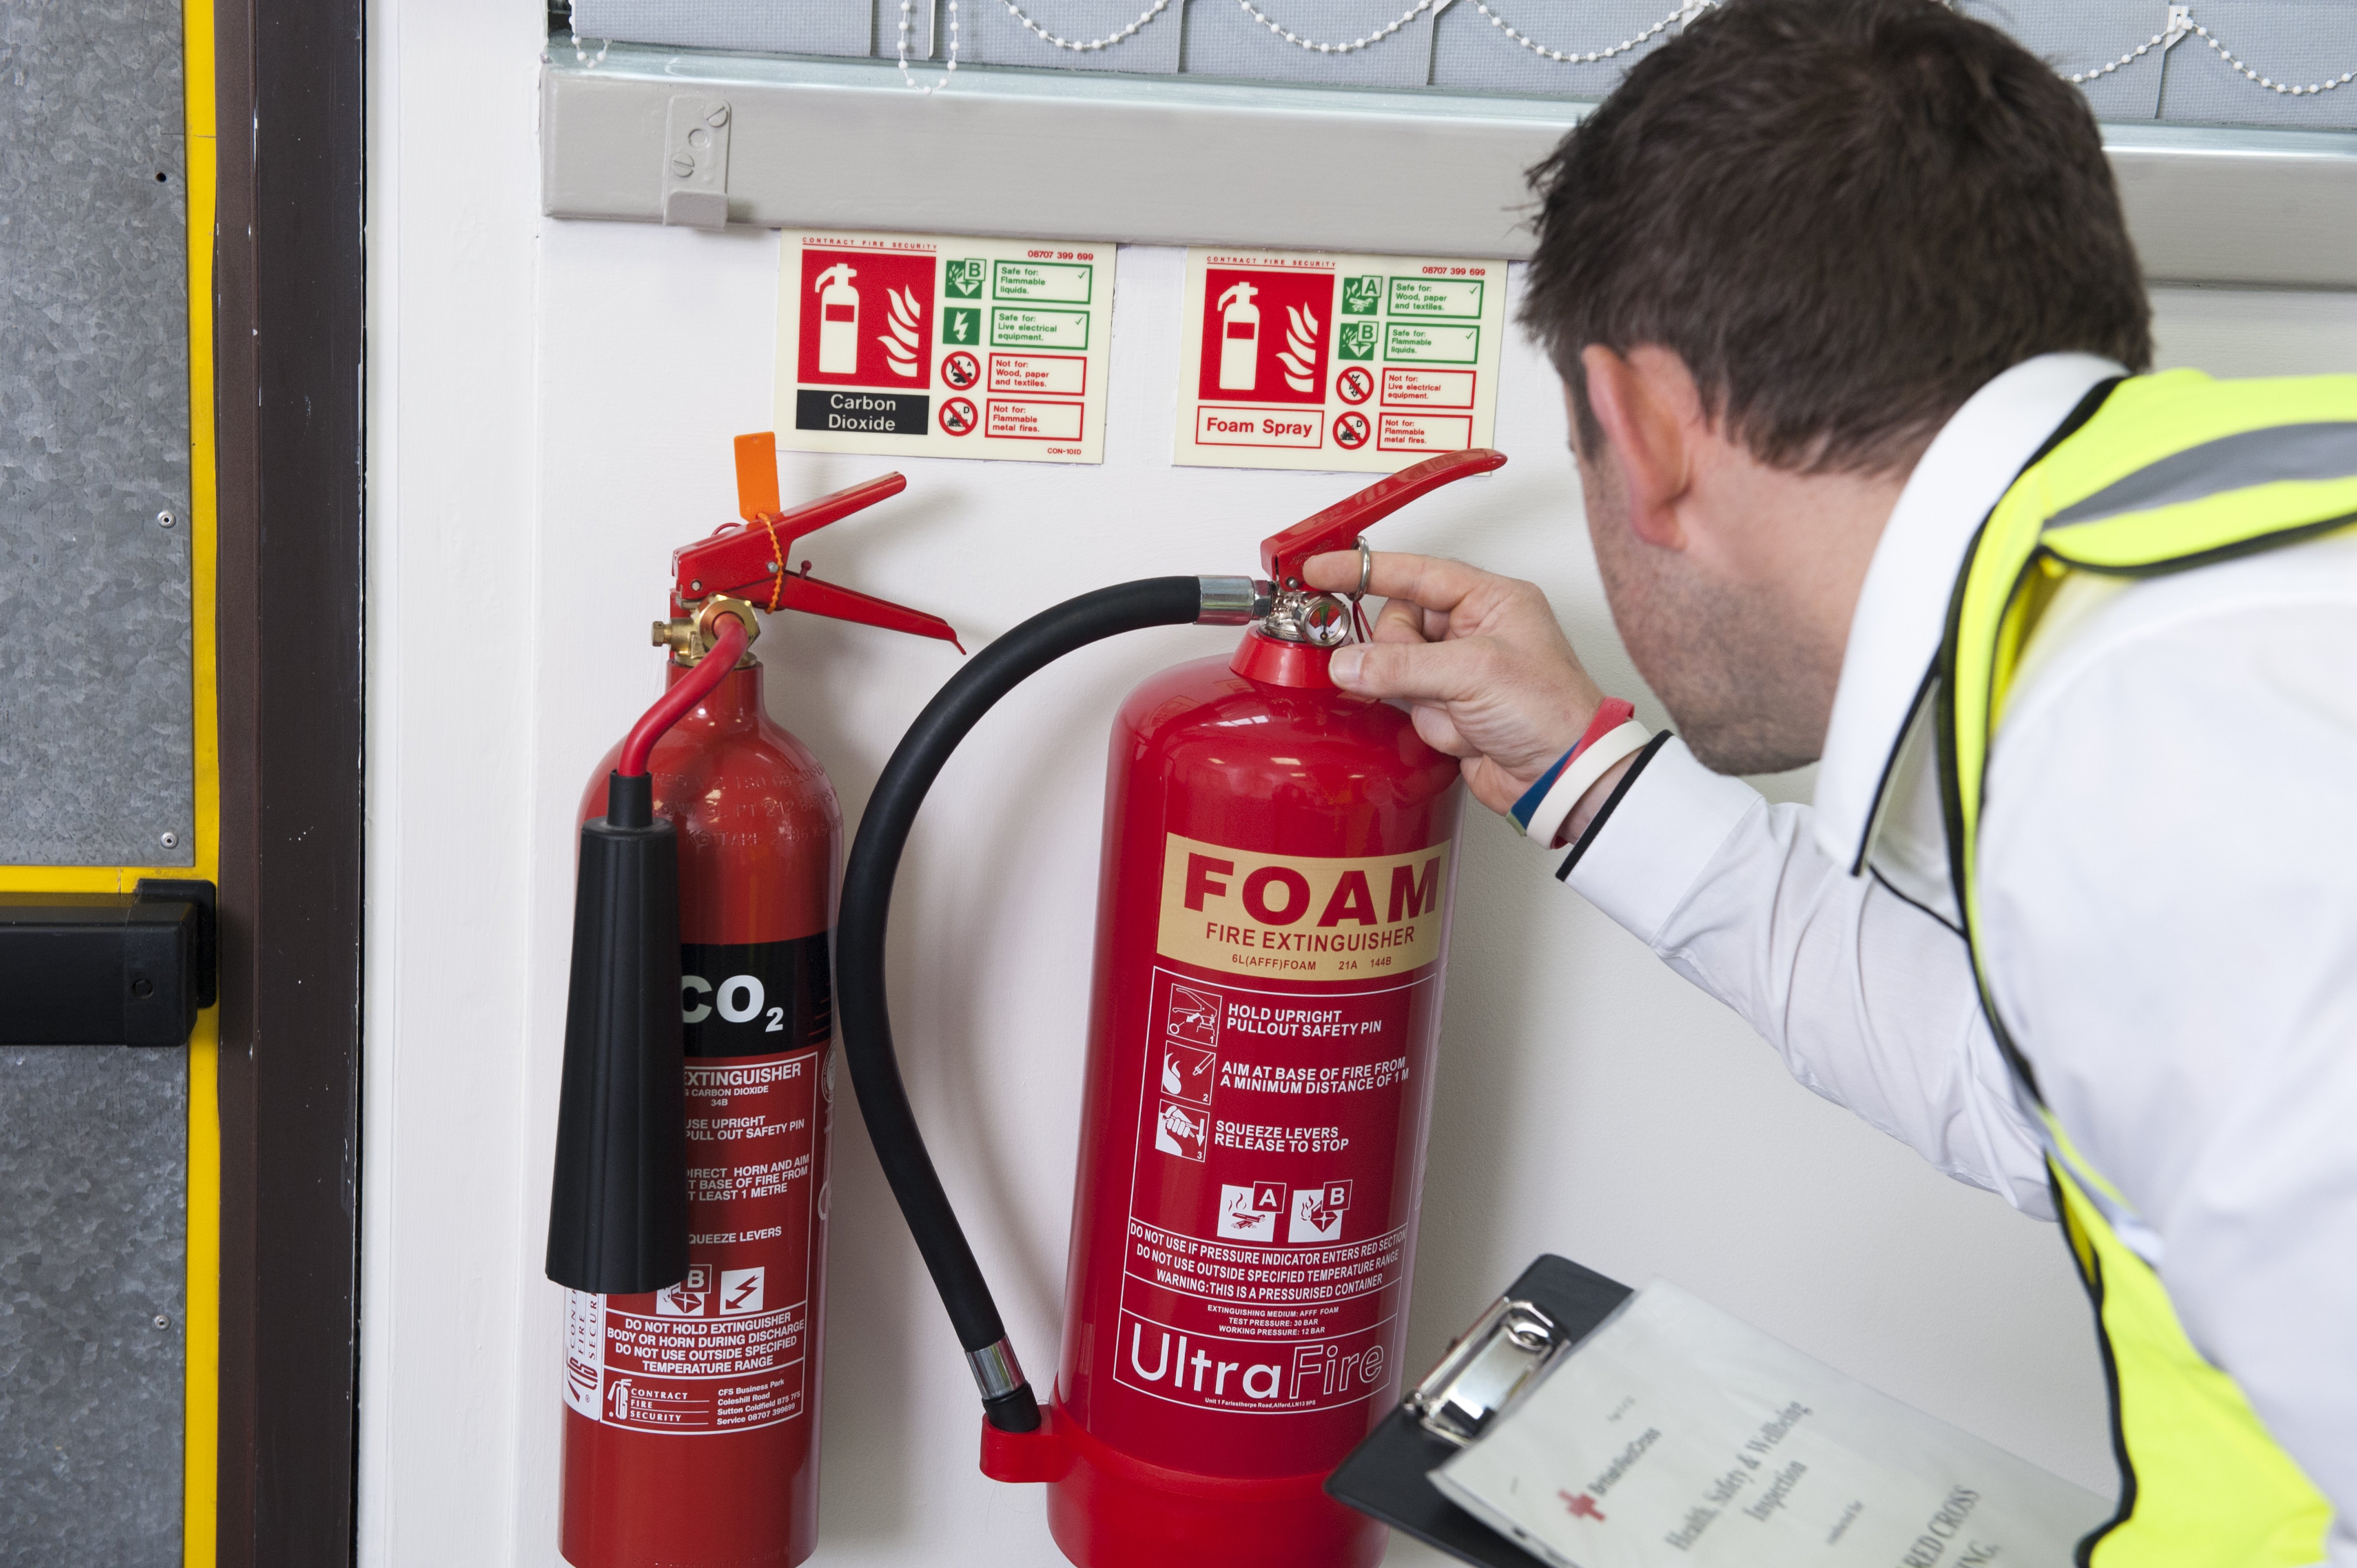 How fire safety regulations impact the workplace